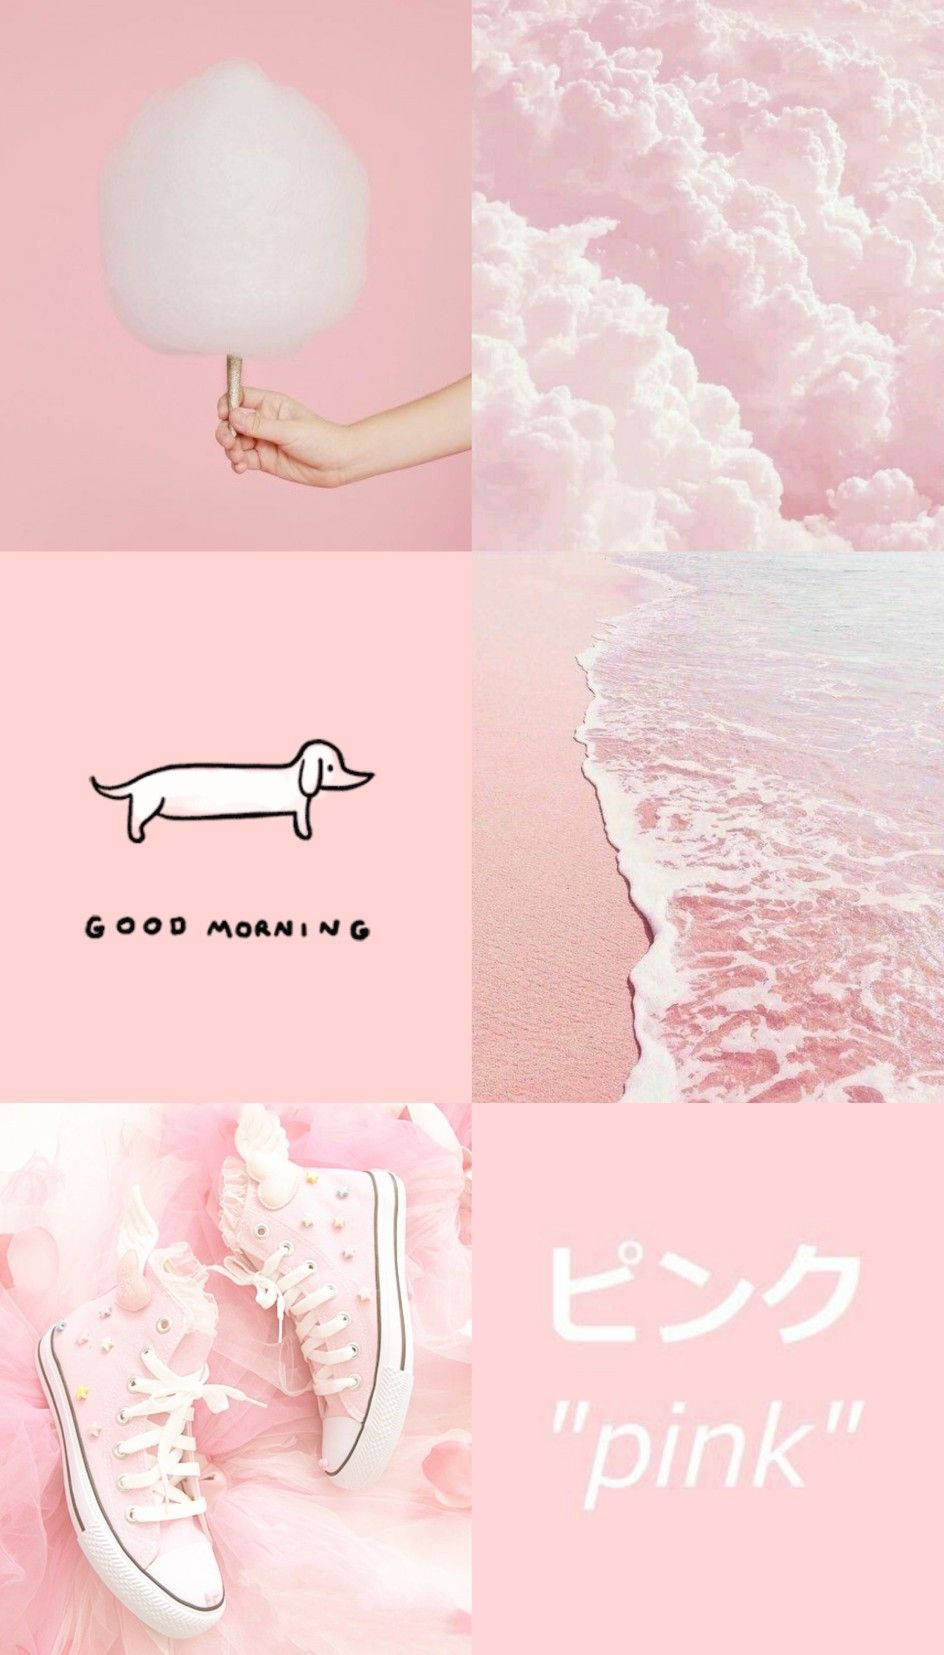 Cute Pink Aesthetic Collage Design Wallpaper